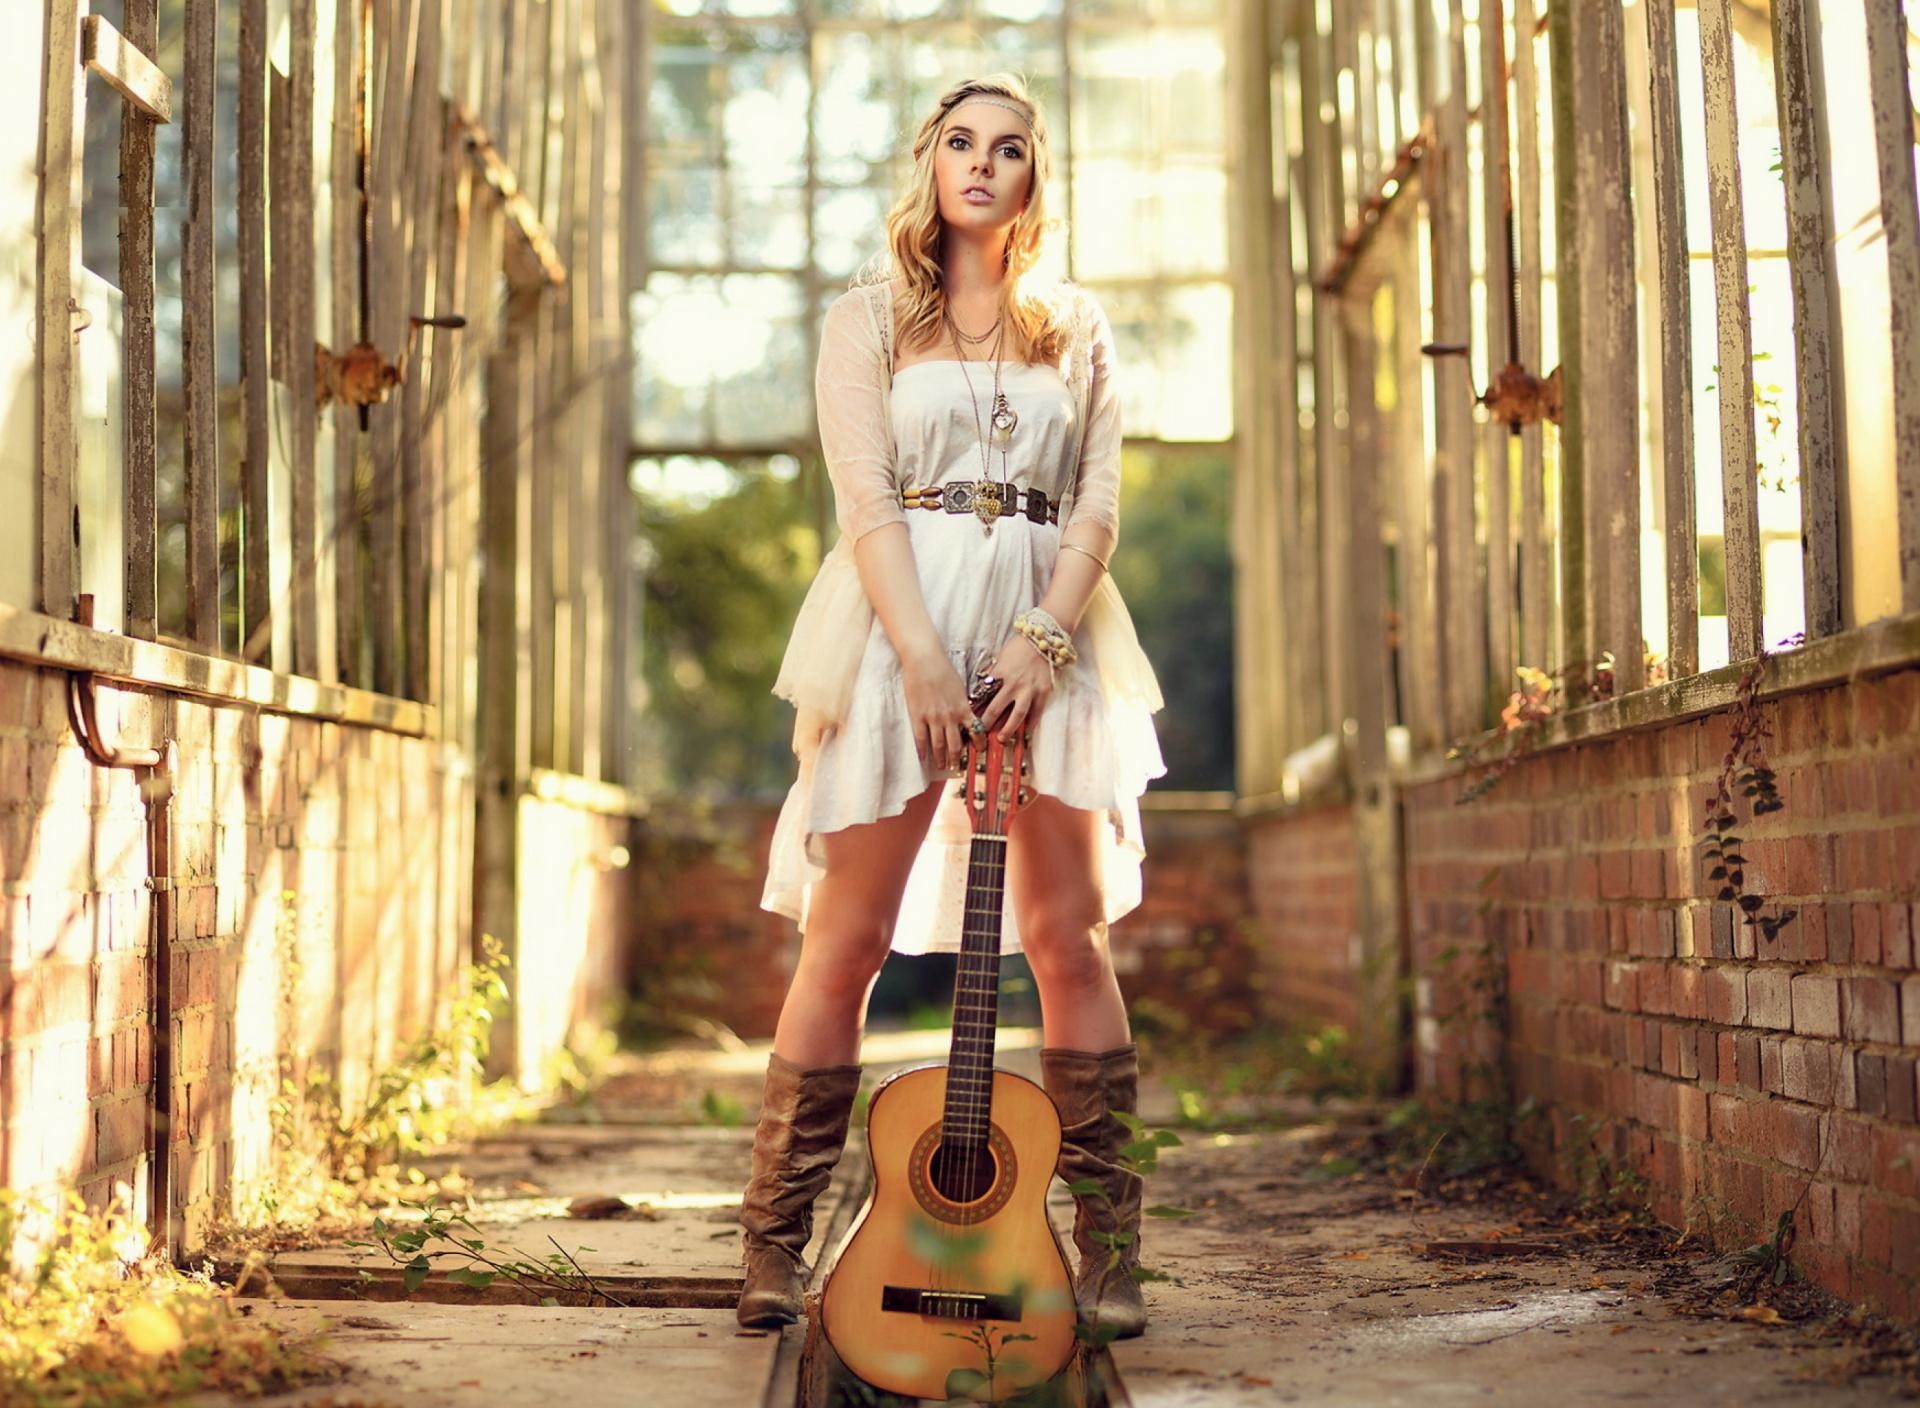 1920x1408 wallpaper.wiki-Girl-With-Guitar-Chic-Country-Style-